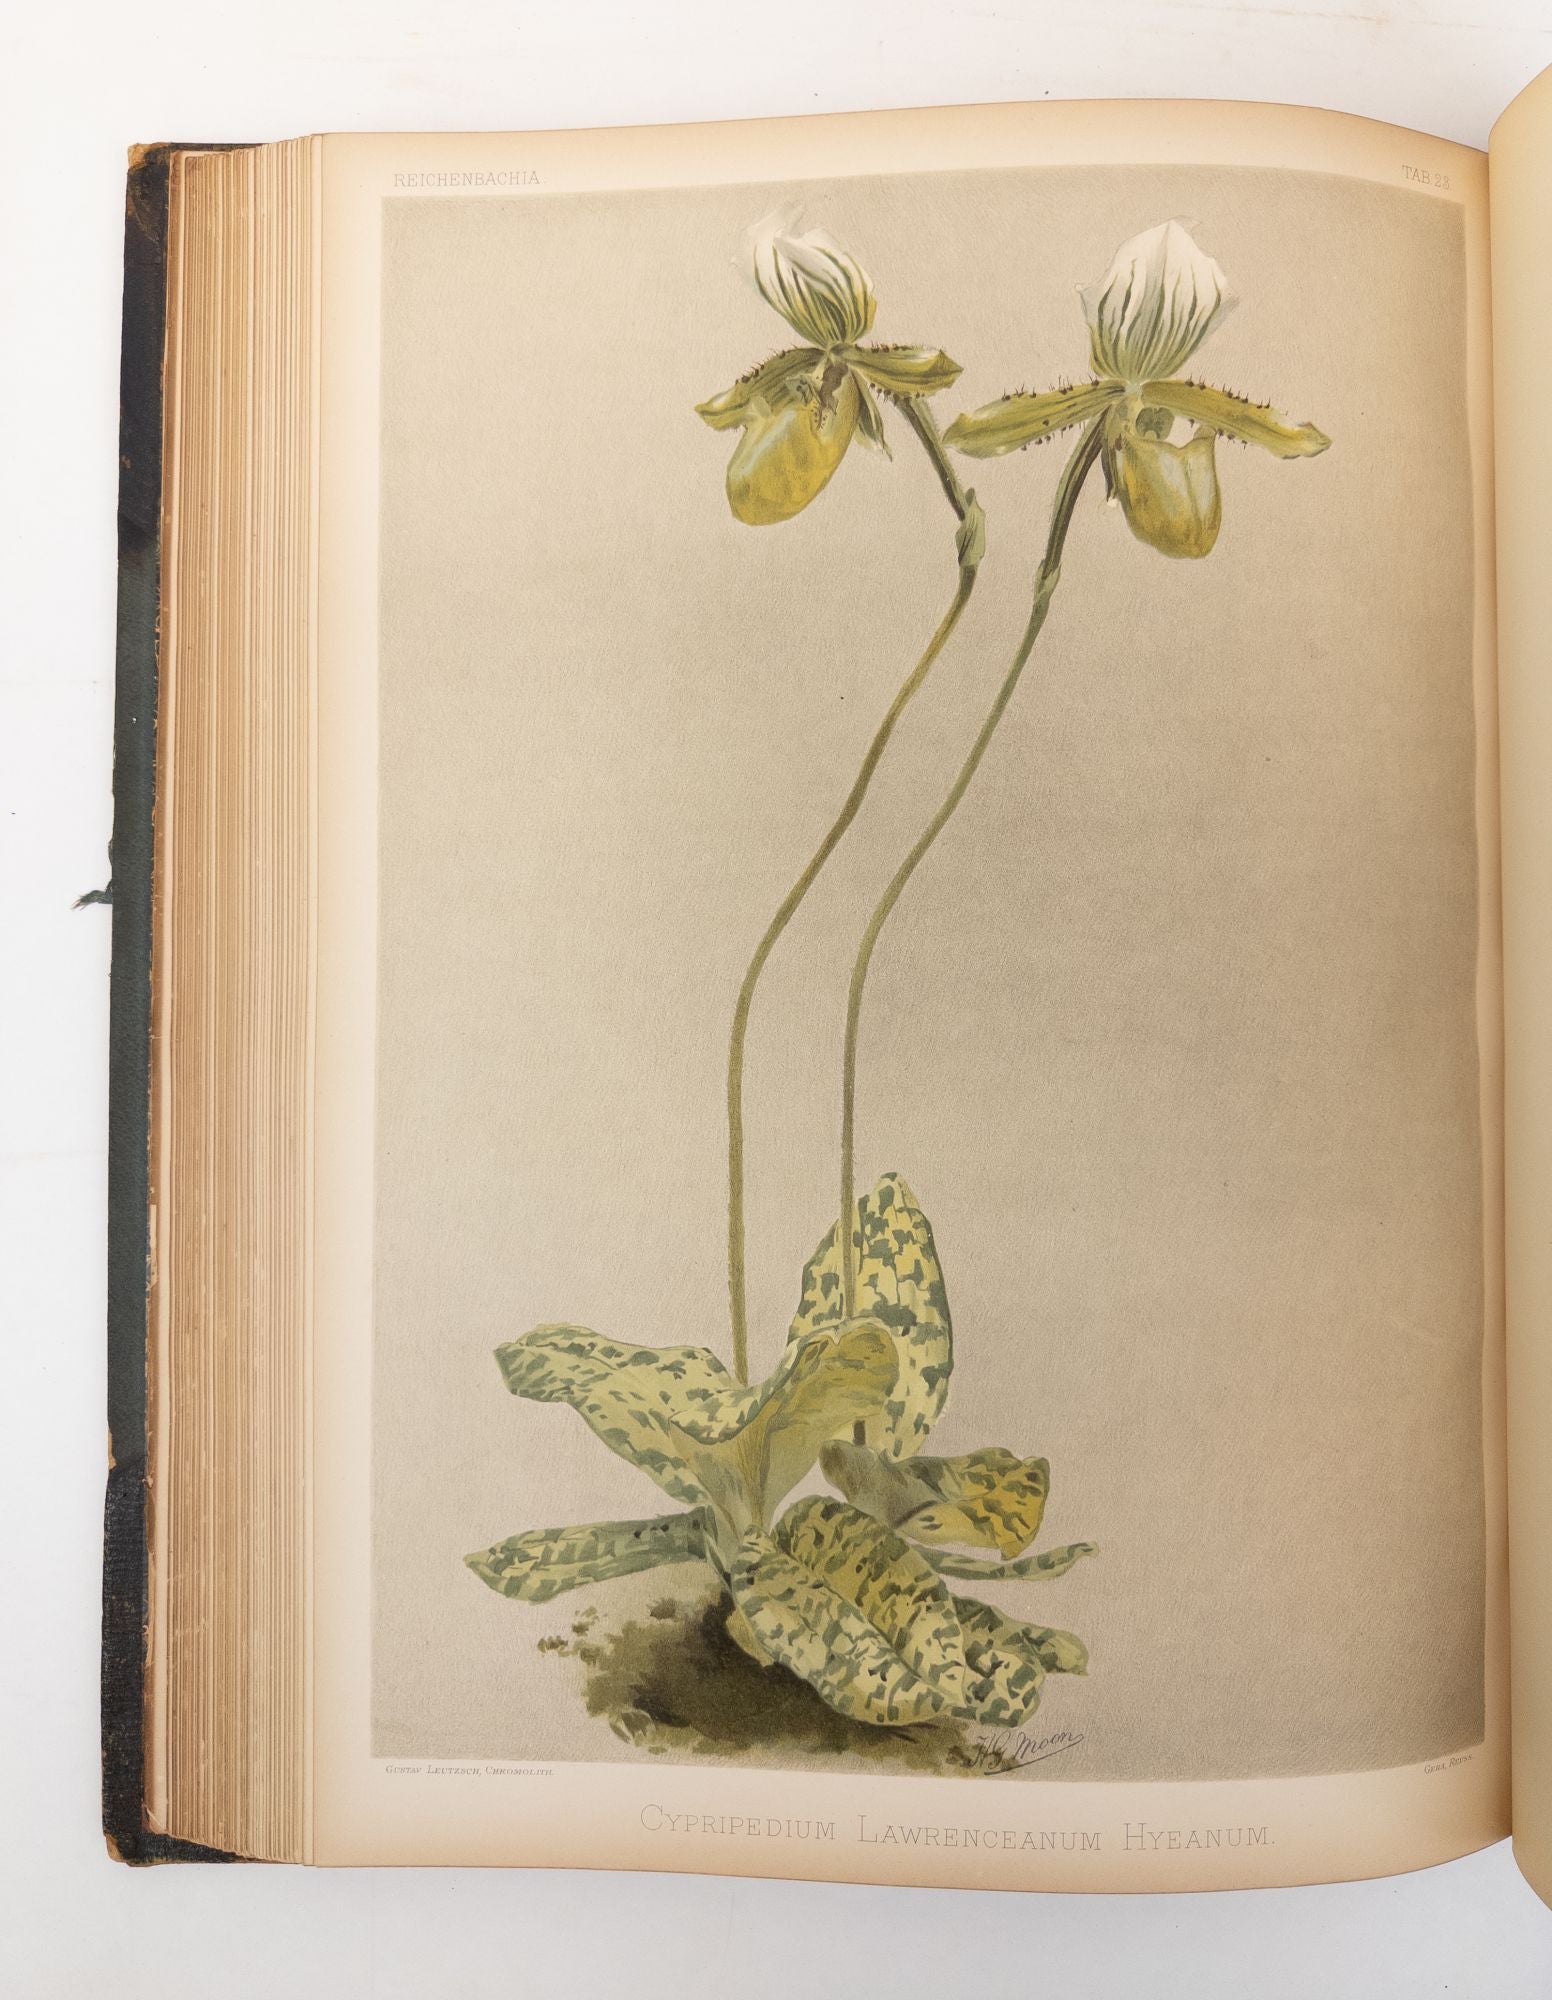 Product Image for REICHENBACHIA. ORCHIDS ILLUSTRATED AND DESCRIBED [Four Volumes]